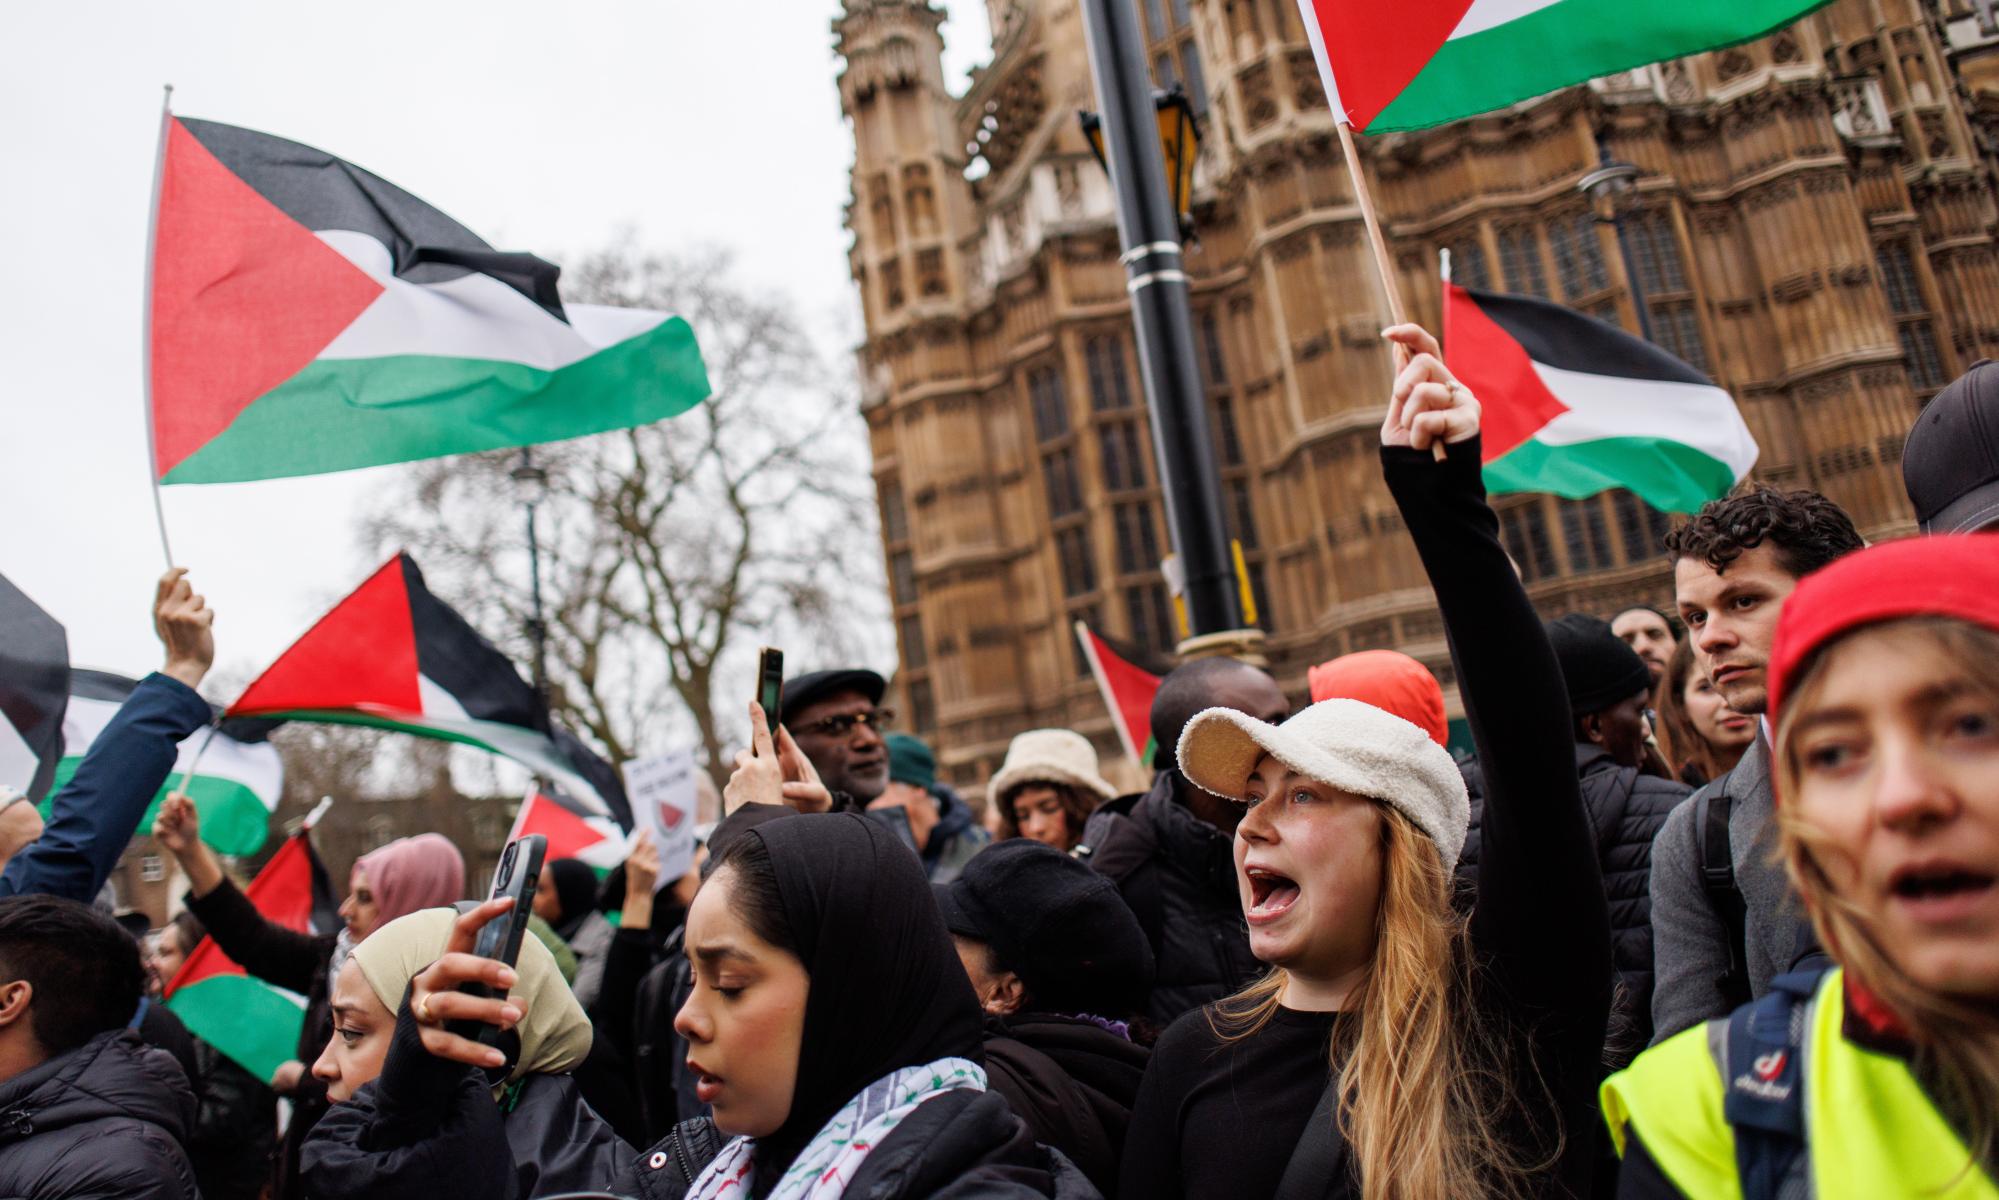 ministers consider ban on mps engaging with pro-palestine and climate protesters